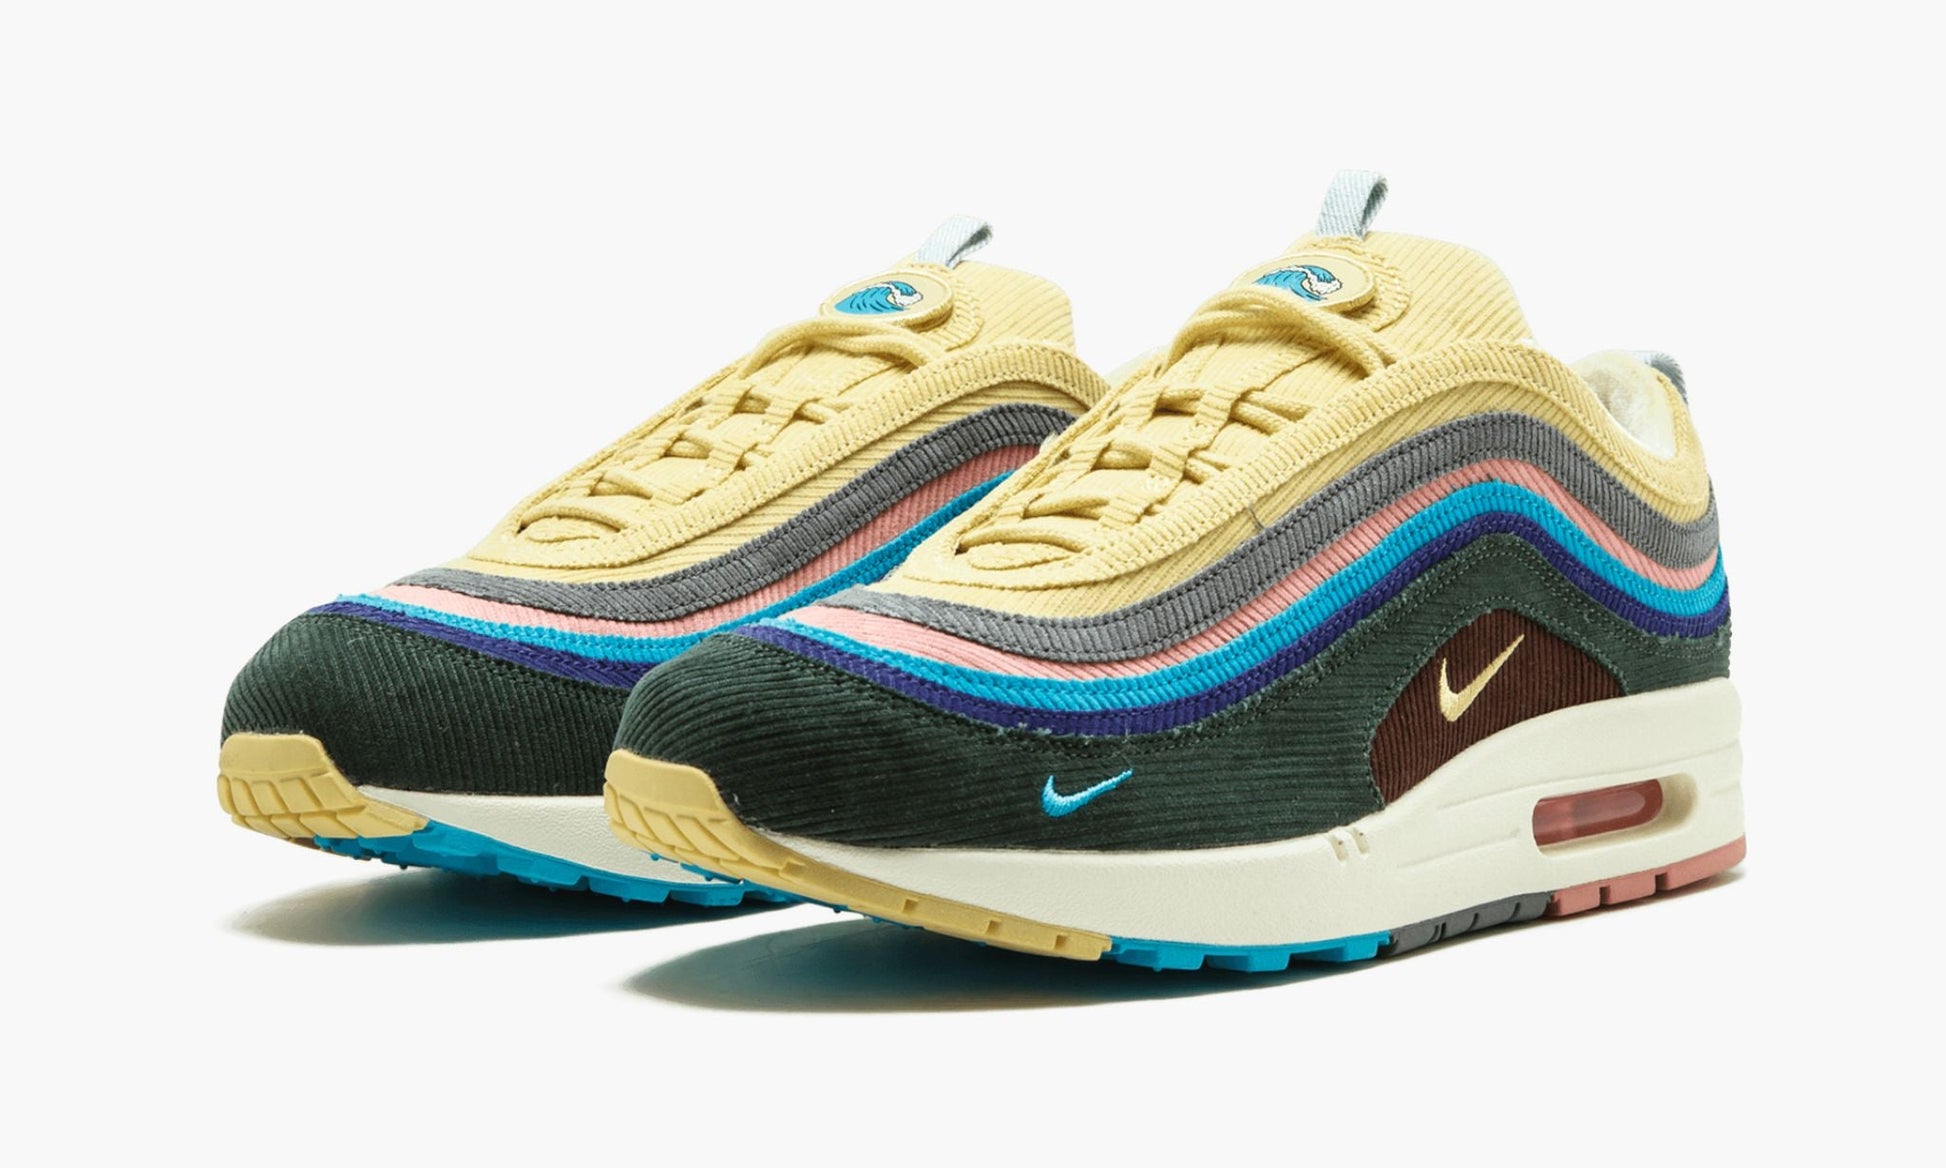 Air Max 1/97 VF SW "Sean Wotherspoon"